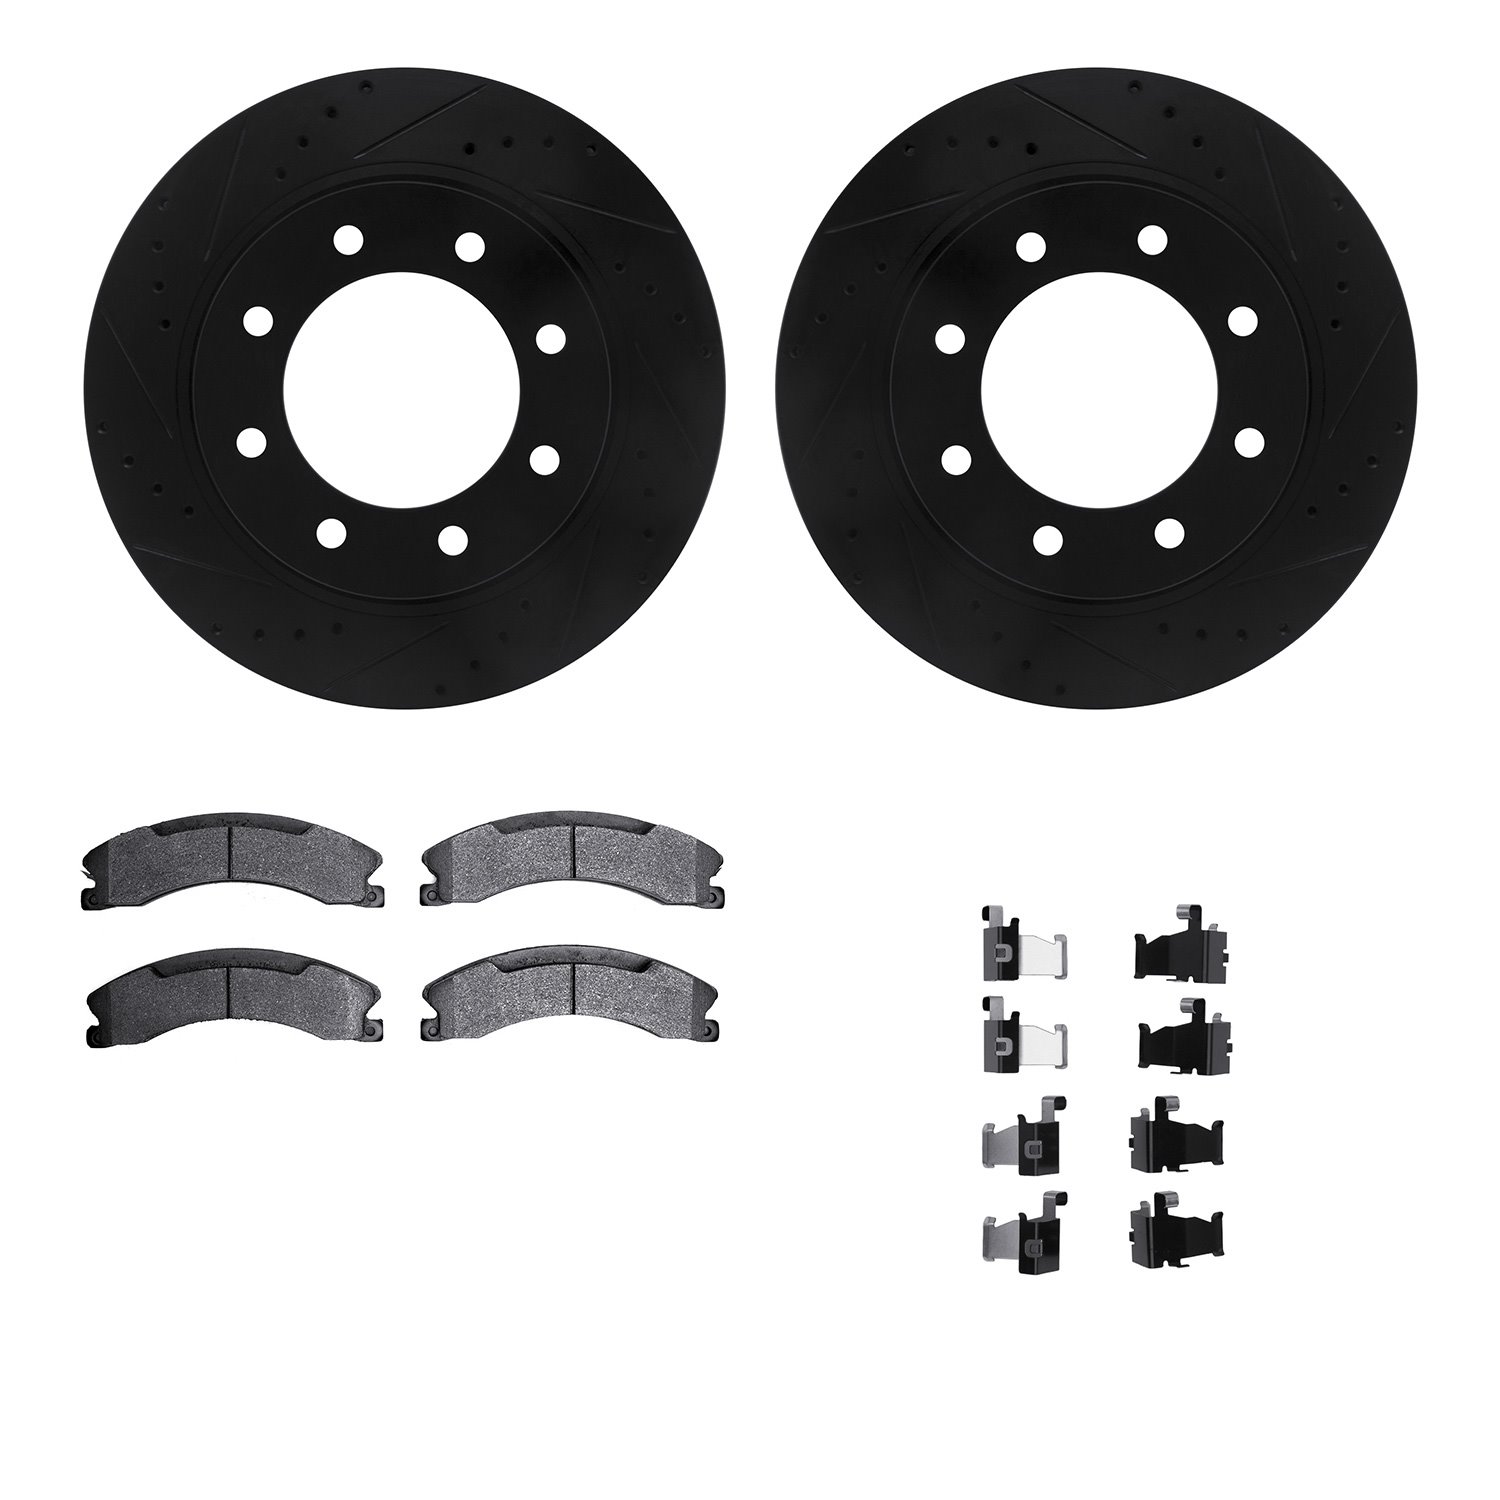 8412-67007 Drilled/Slotted Brake Rotors with Ultimate-Duty Brake Pads Kit & Hardware [Black], 2012-2021 Infiniti/Nissan, Positio